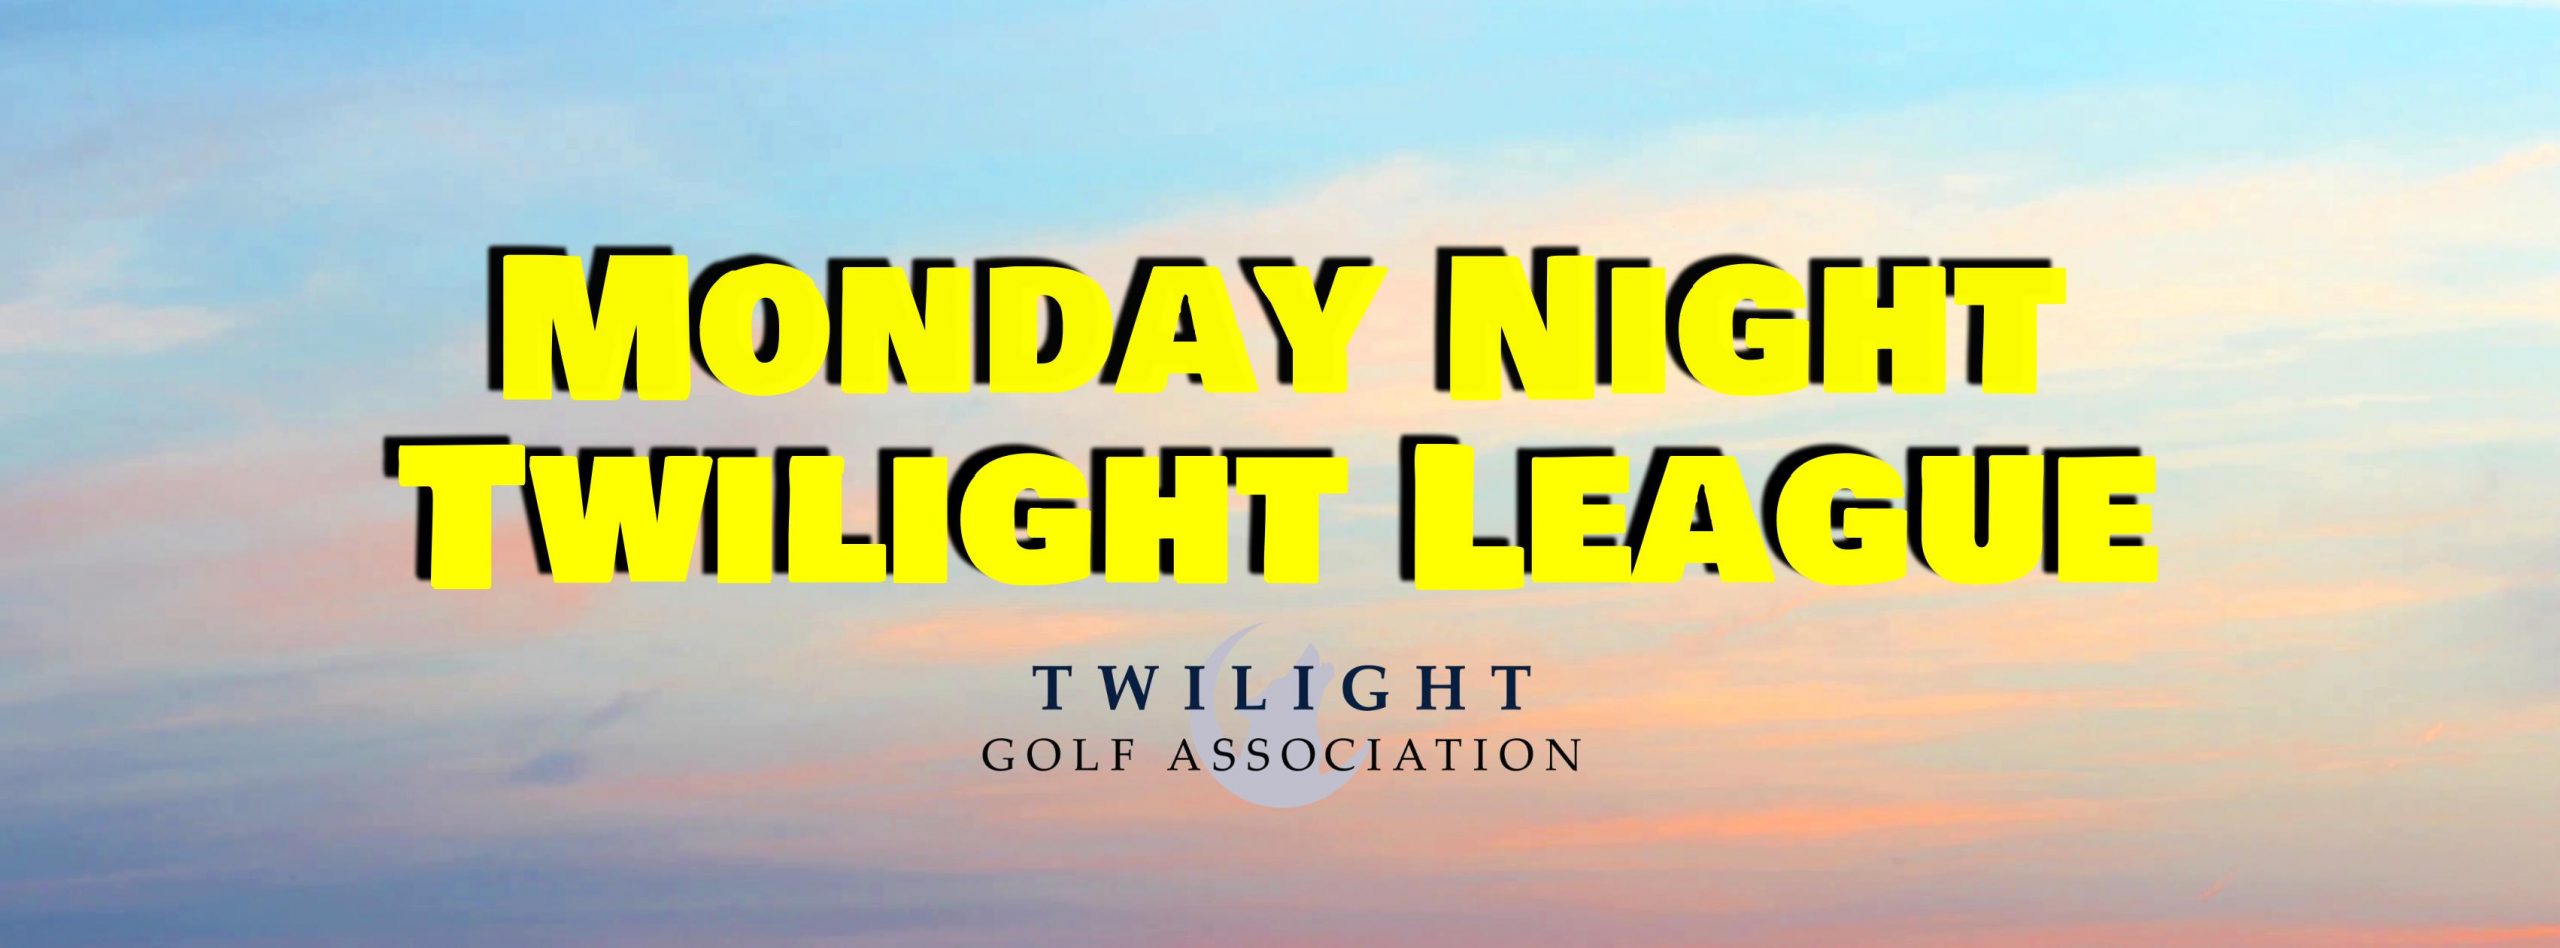 Monday Night Twilight League at Tri County Golf Ranch